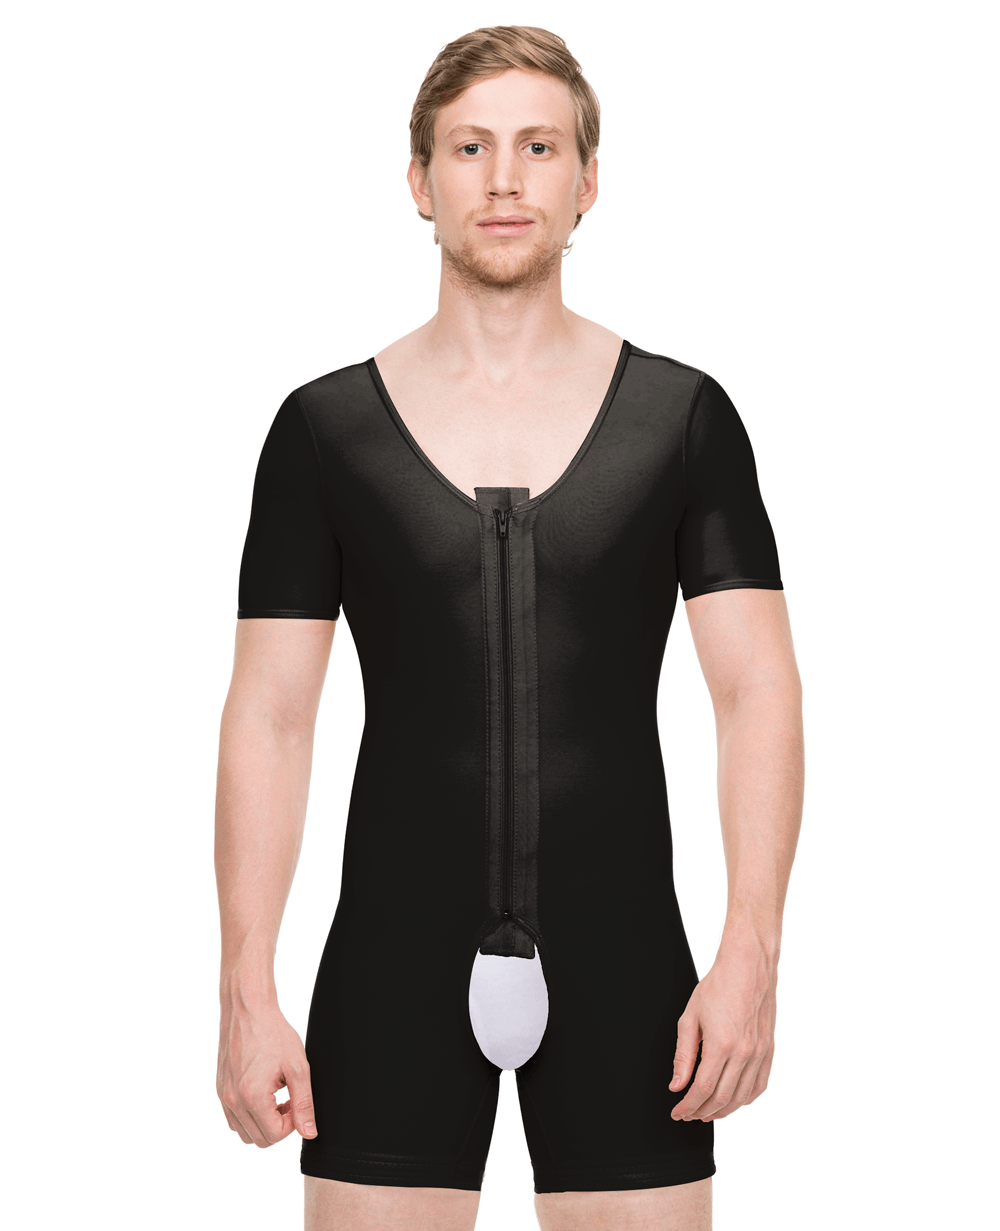 Isavela Male Compression Body Suit - No Sleeves